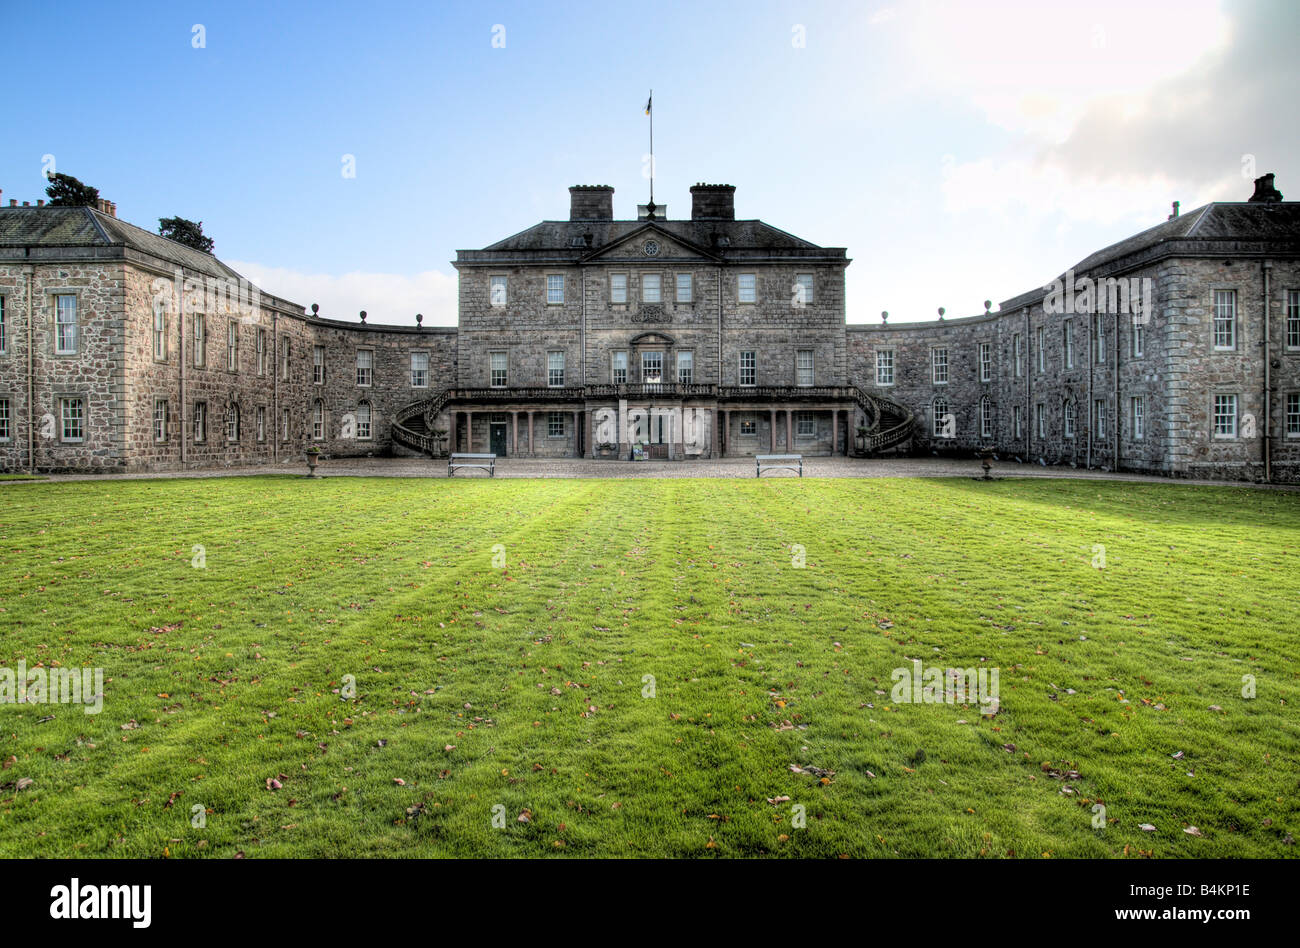 A view of haddo house from the front (main entrance) Stock Photo